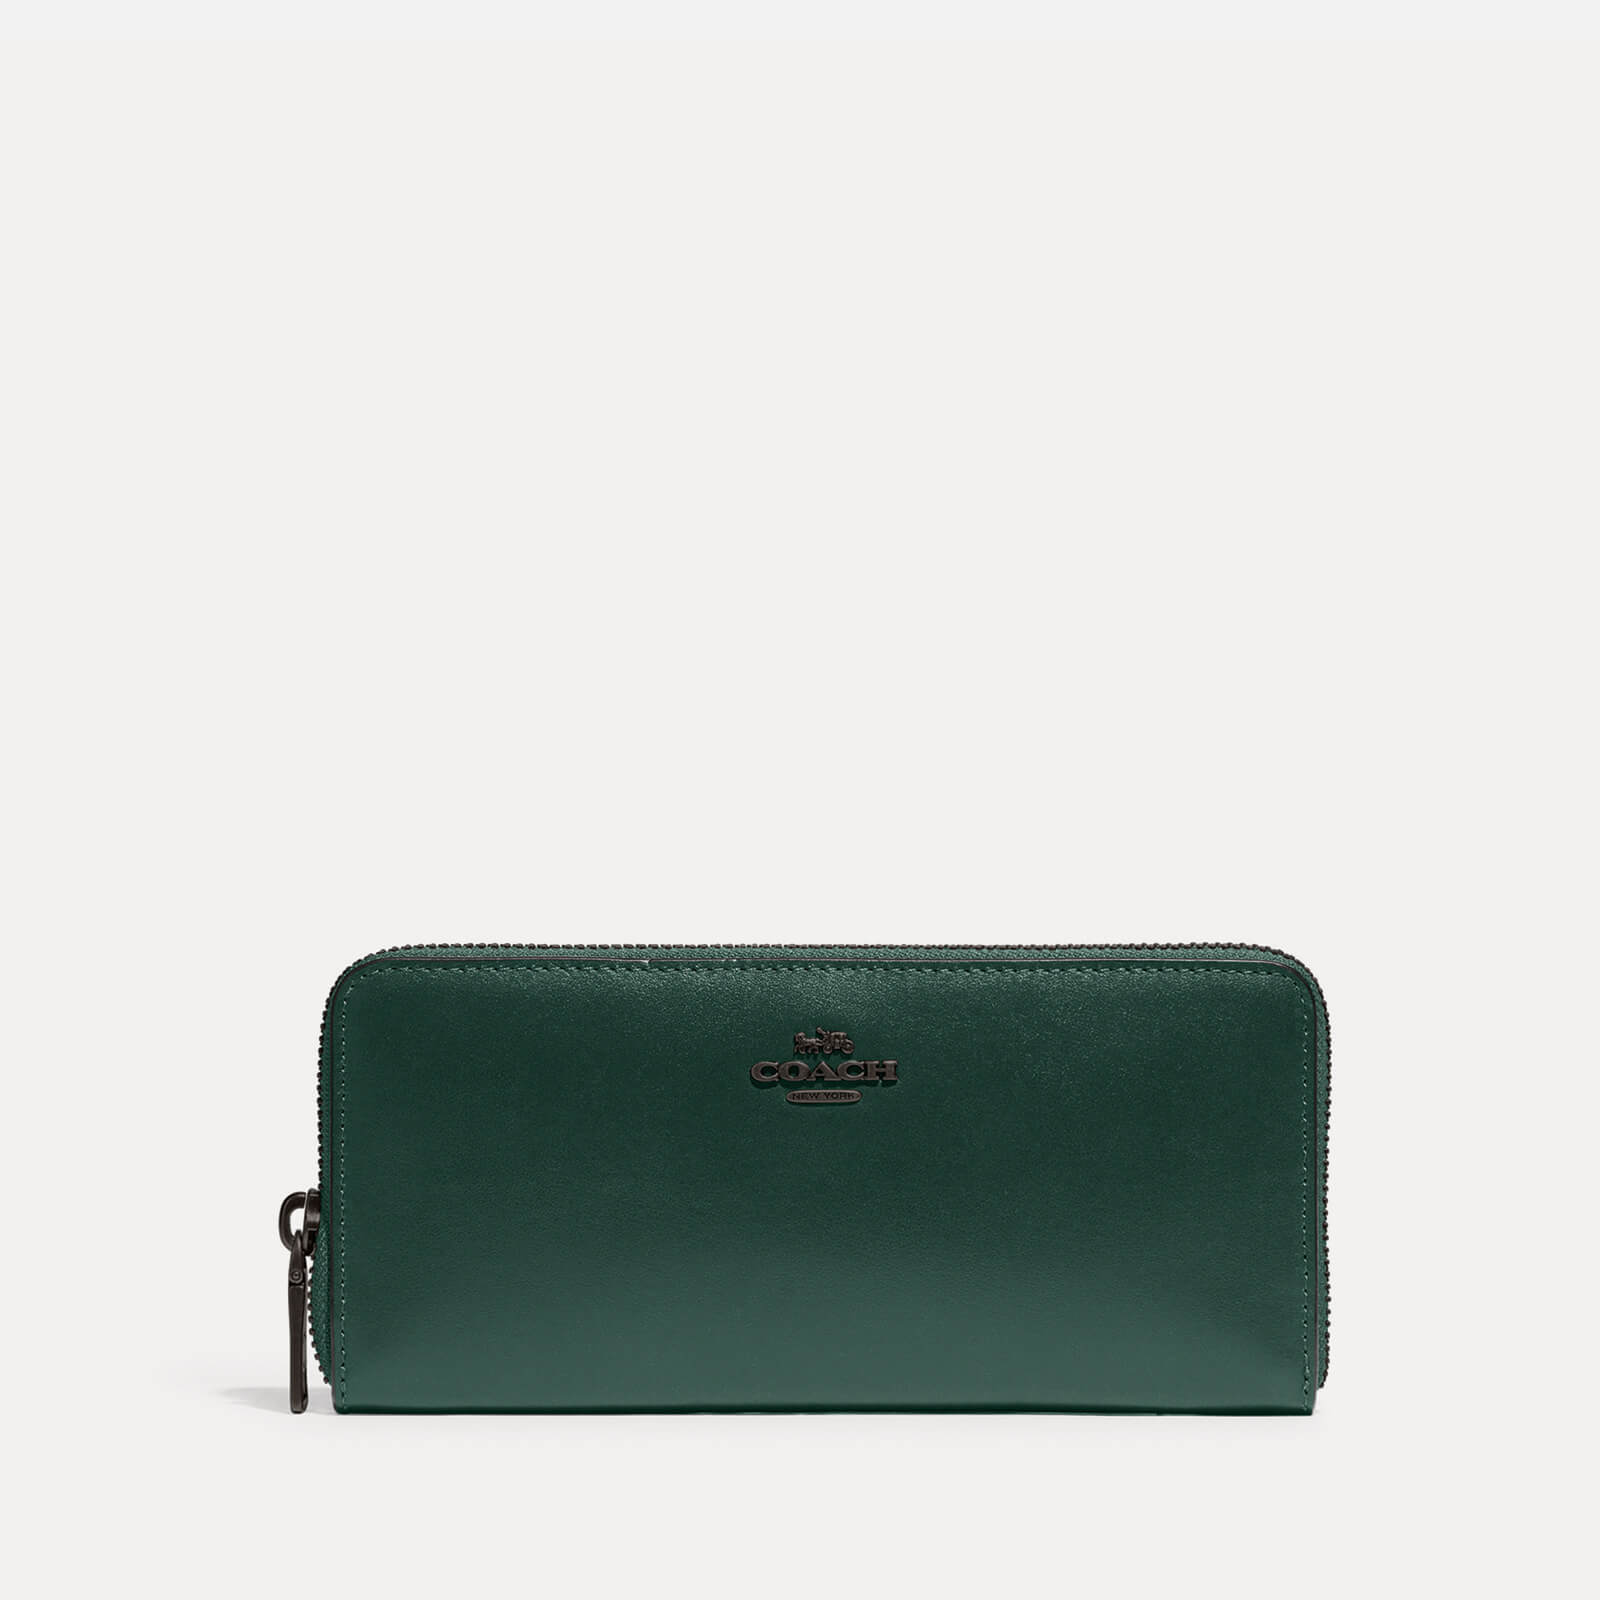 Coach Logo-Detailed Leather Wallet